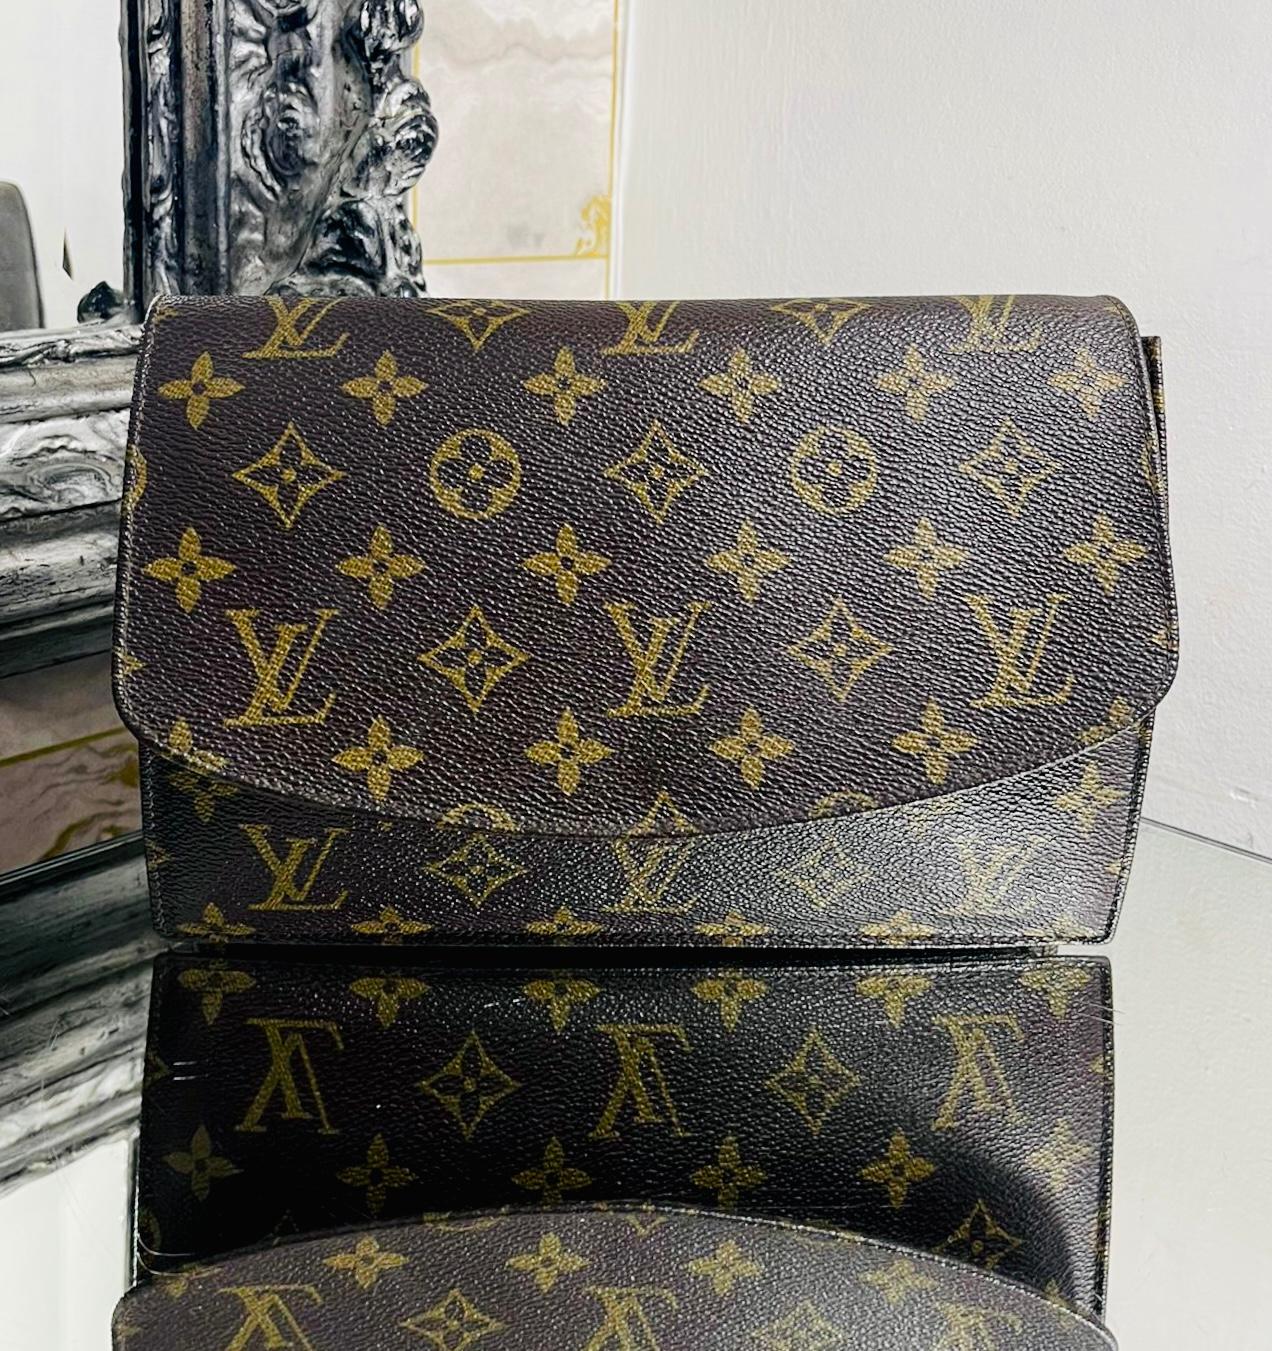 Louis Vuitton Monogram Pochette Rabat Coated Canvas Clutch Bag

Brown, rectangle shaped bag designed with signature monogram throughout.

Featuring front flap snap closure leading to zipped pocket and light brown interior.

Size – Height 16cm, Width